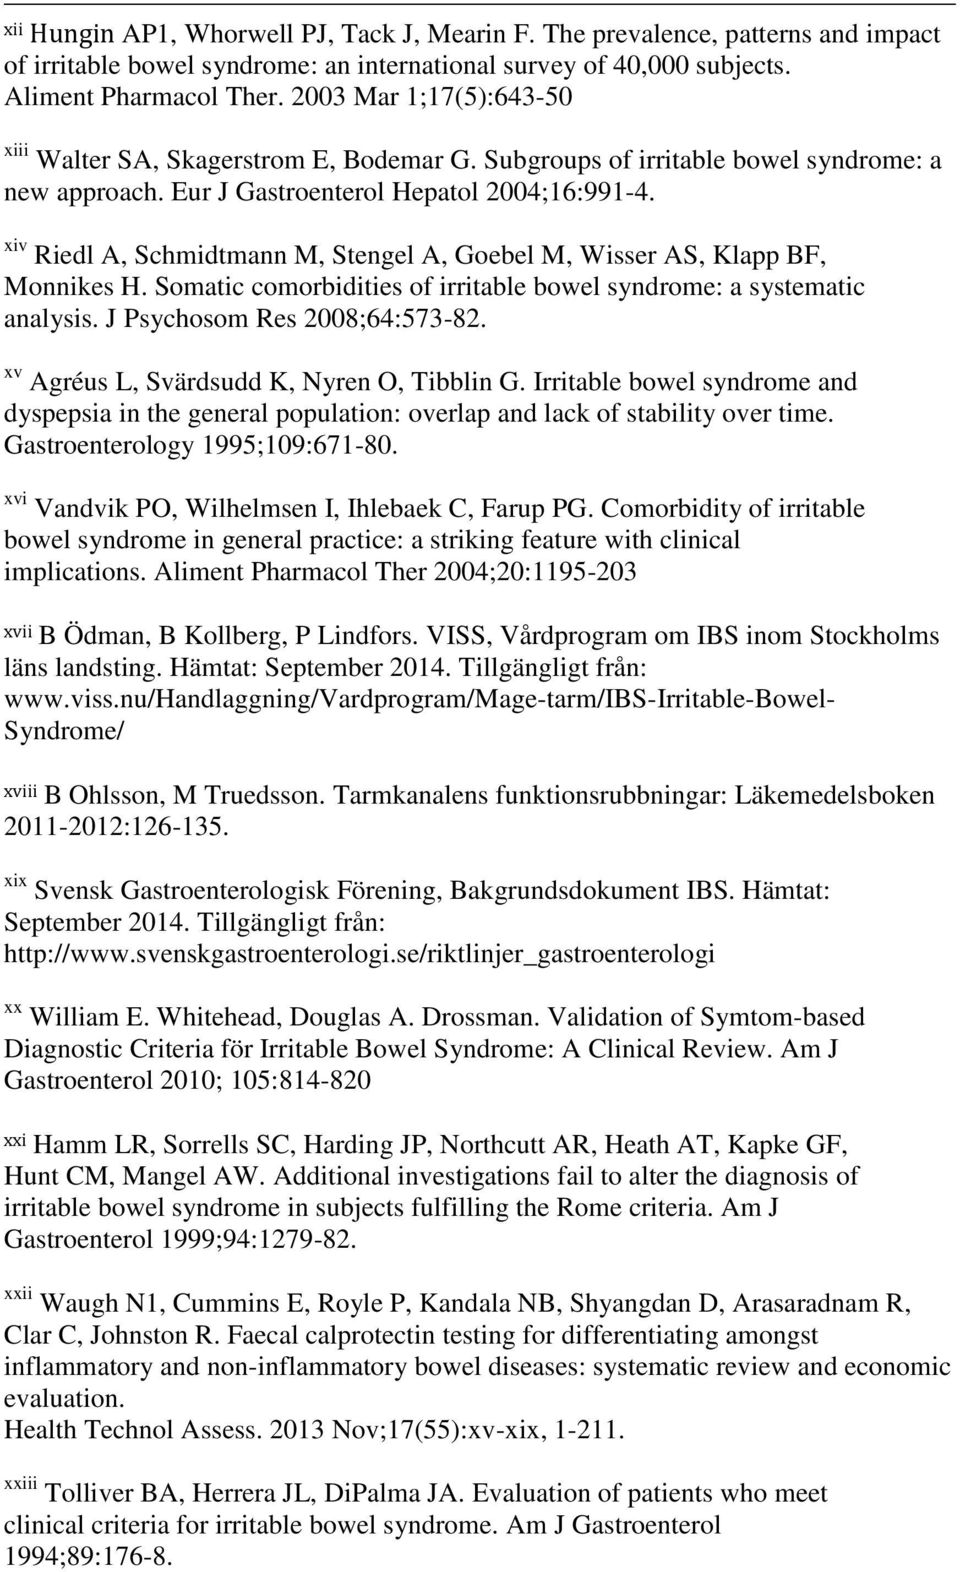 xiv Riedl A, Schmidtmann M, Stengel A, Goebel M, Wisser AS, Klapp BF, Monnikes H. Somatic comorbidities of irritable bowel syndrome: a systematic analysis. J Psychosom Res 2008;64:573-82.